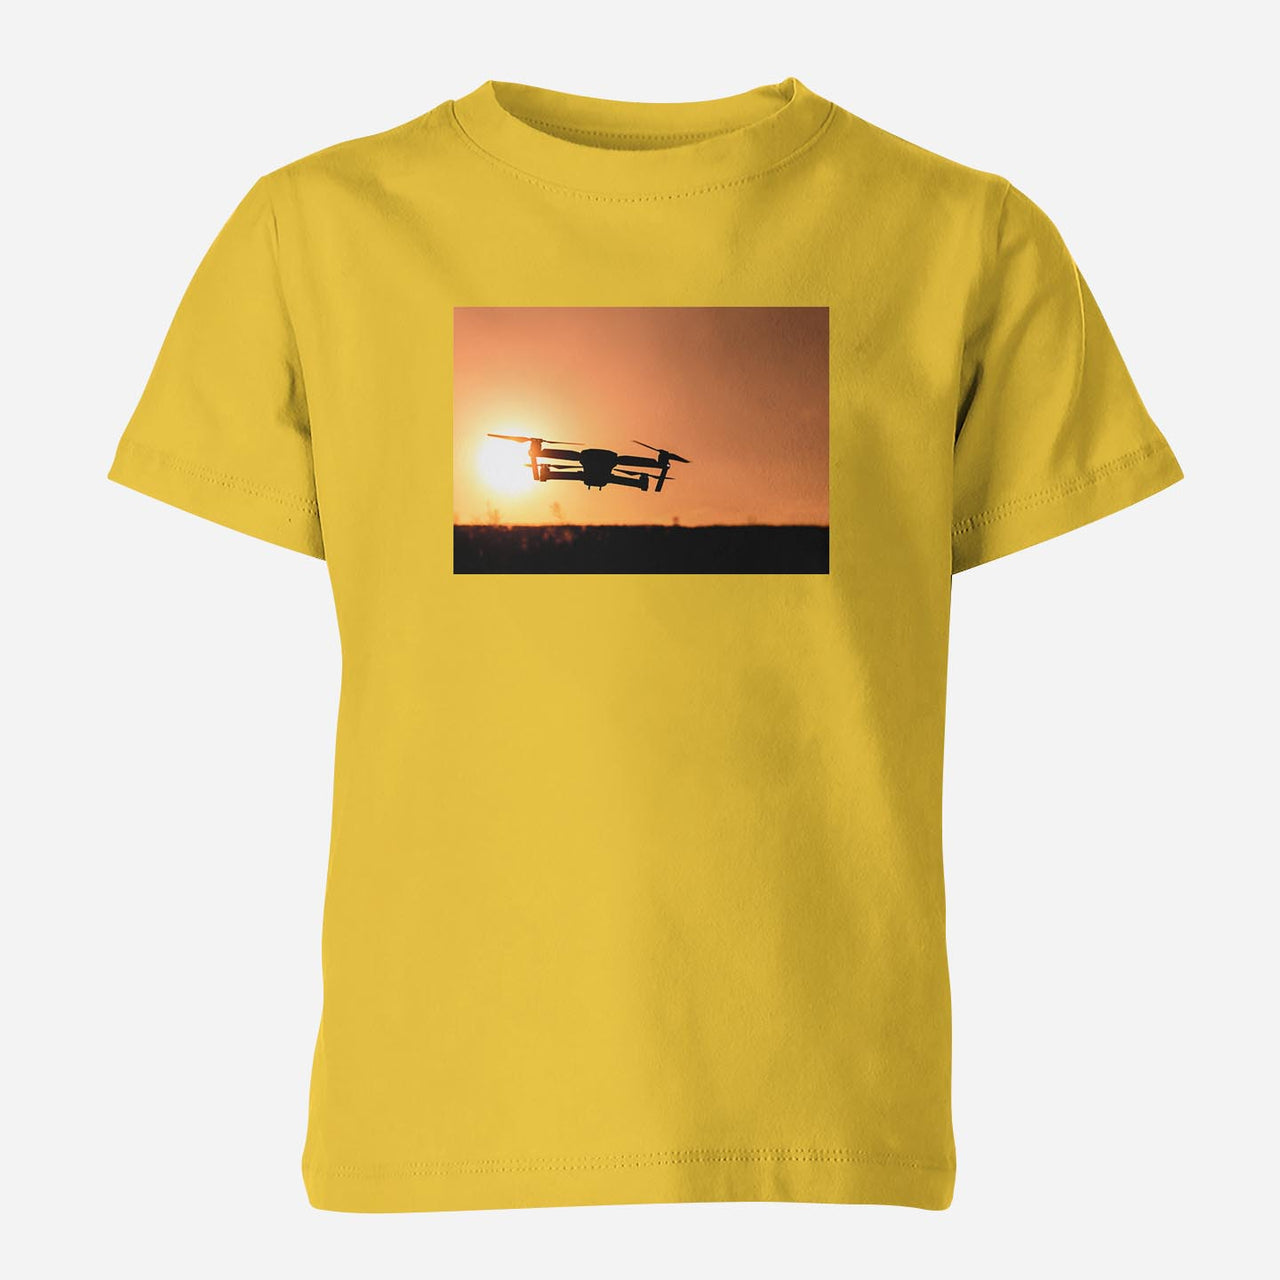 Amazing Drone in Sunset Designed Children T-Shirts